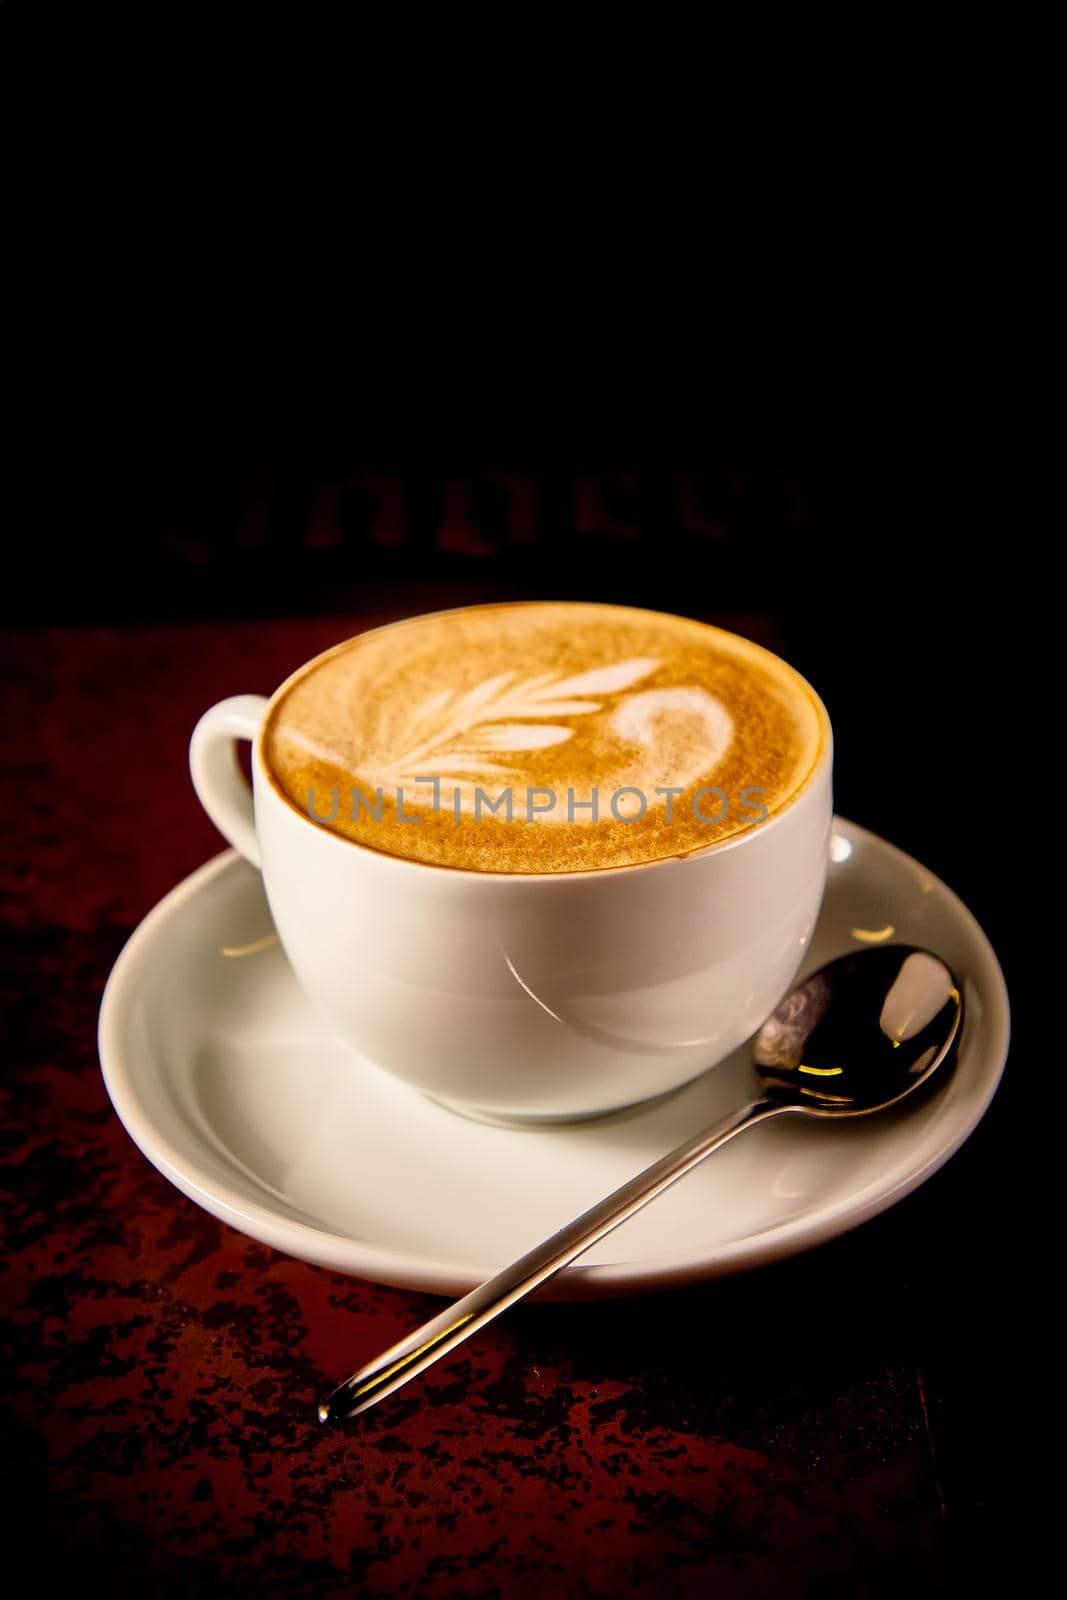 A Cup of cappuccino coffee on a dark background by Milanchikov